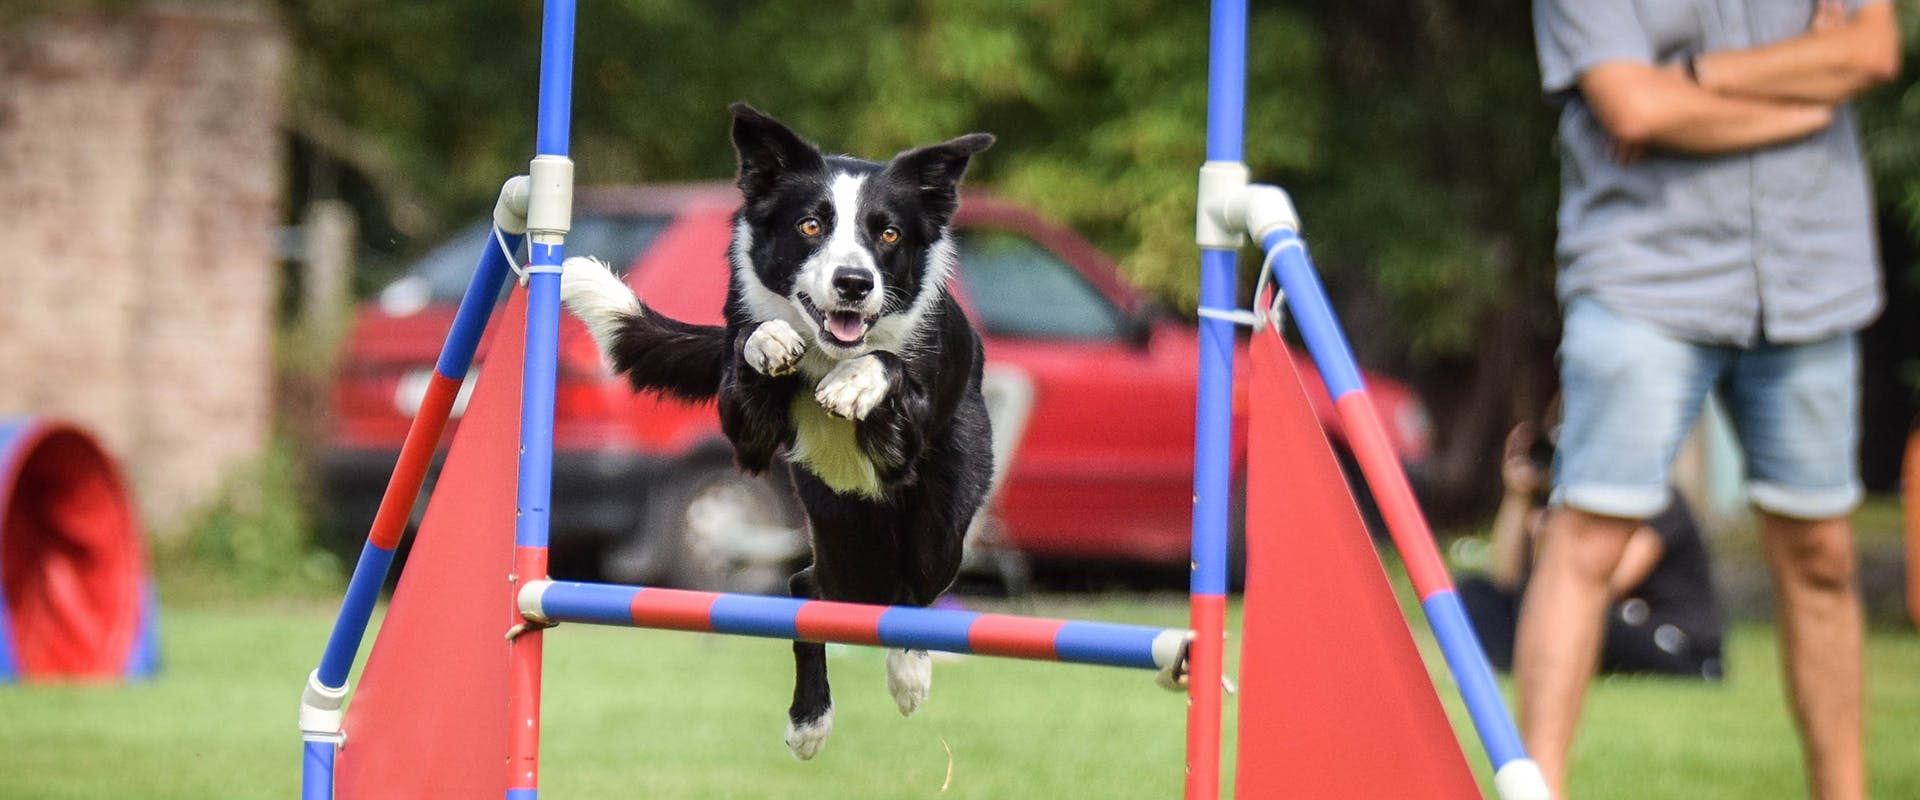 A Border Collie jumping over hurdles in an agility task